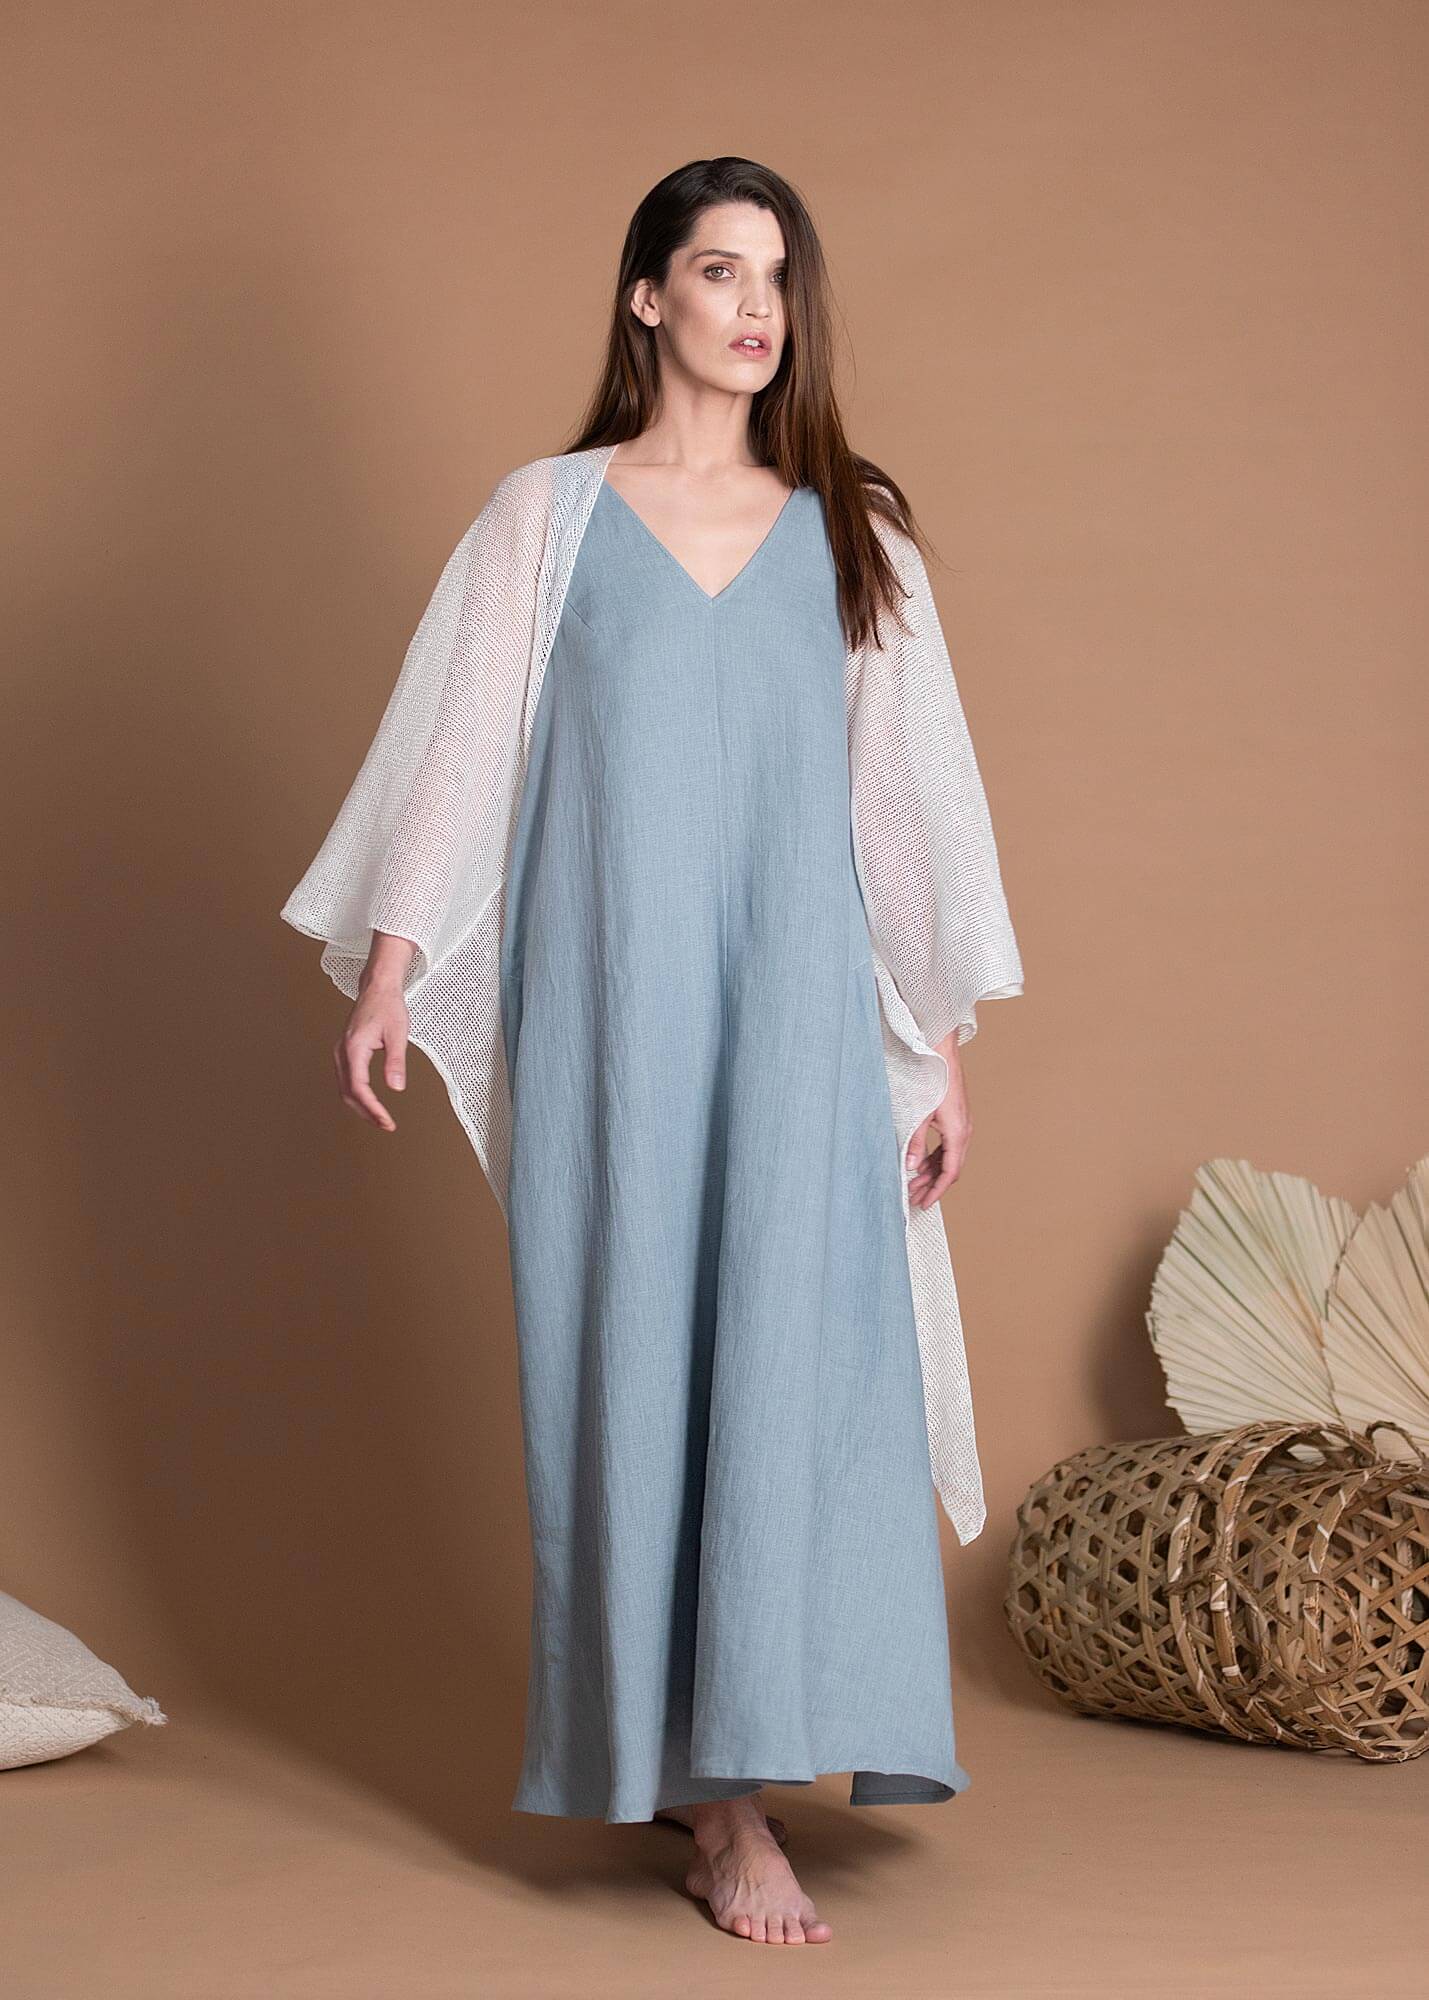 White Linen Knitted Cover Up With Wide Sleeves For Women